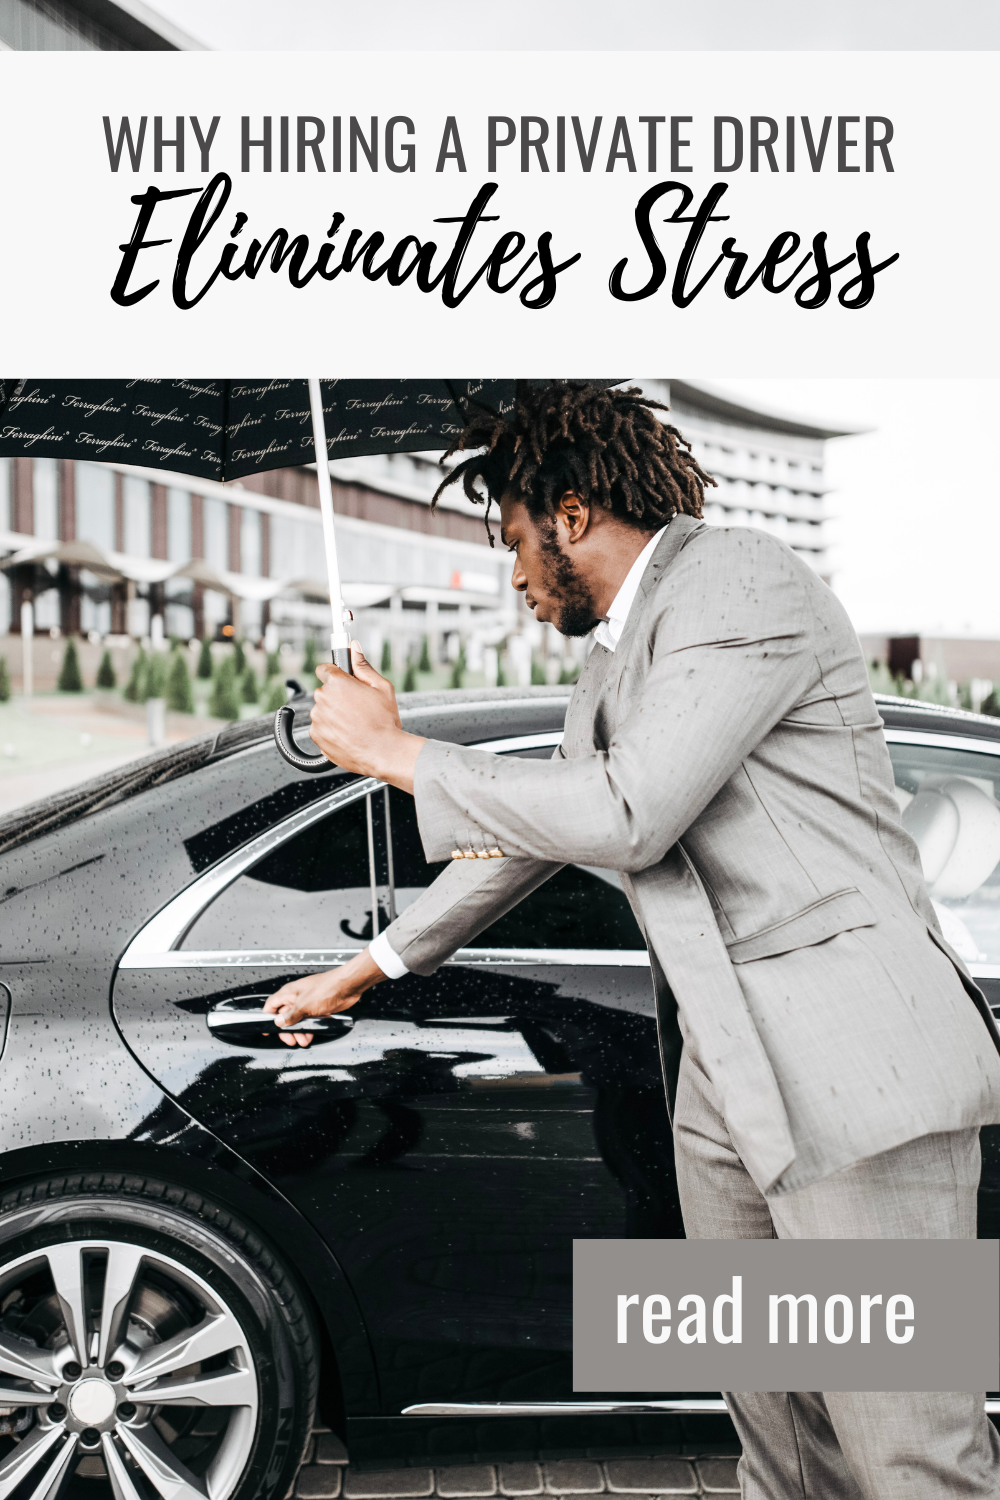 Driver holds umbrella and opens the door to a private car. This article covers why hiring a private driver eliminates stress.